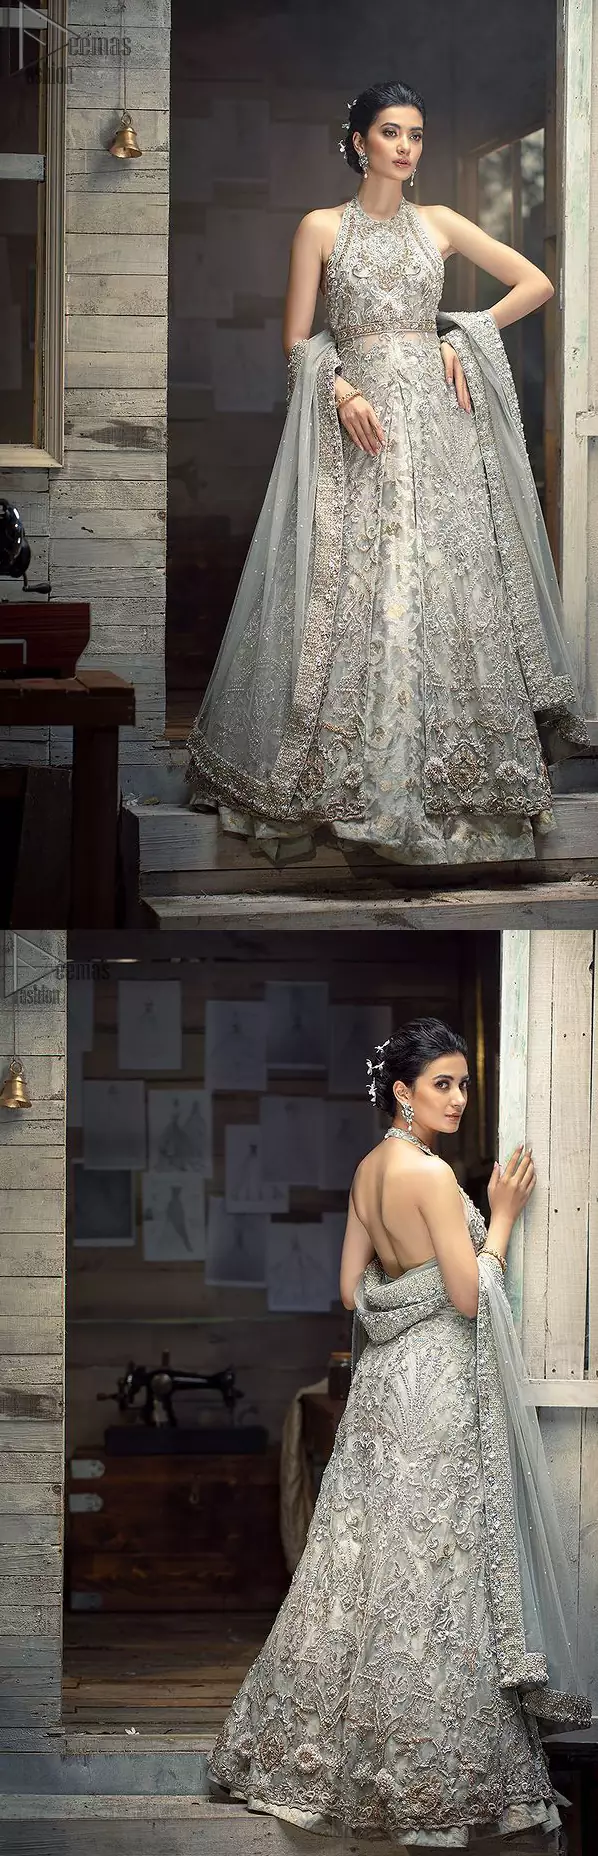 Nikah Wear - Light Grey Halter Neck Gown Lehenga. The floral and the flowery climber networks on fully embellished Halter neck and blouse has exquisitely exaggerated in the beauty of the costume making it very unique. The bottom lehenga with Fixed Waist Belt With Side Zip Closure is composed of Katan Banarsi Jamawar fully embellished with flowery climbers with Light Gray colour tone; being exquisitely beautiful in perfecting the complete outfit having a unique fabric and double flare lehenga that is in stellar combo with the blouse with finished edges and Dupatta sideways carried beautifully by the bride with organza fabric and Heavy beautiful golden and Grayish lace on all four bordered finished sides and dabka work on the net inside of the gorgeously made dupatta, whole this costume has its own unifying feature such as 100 % imported high quality overall highly embellished fabric making it the best choice to have by you on your big day.